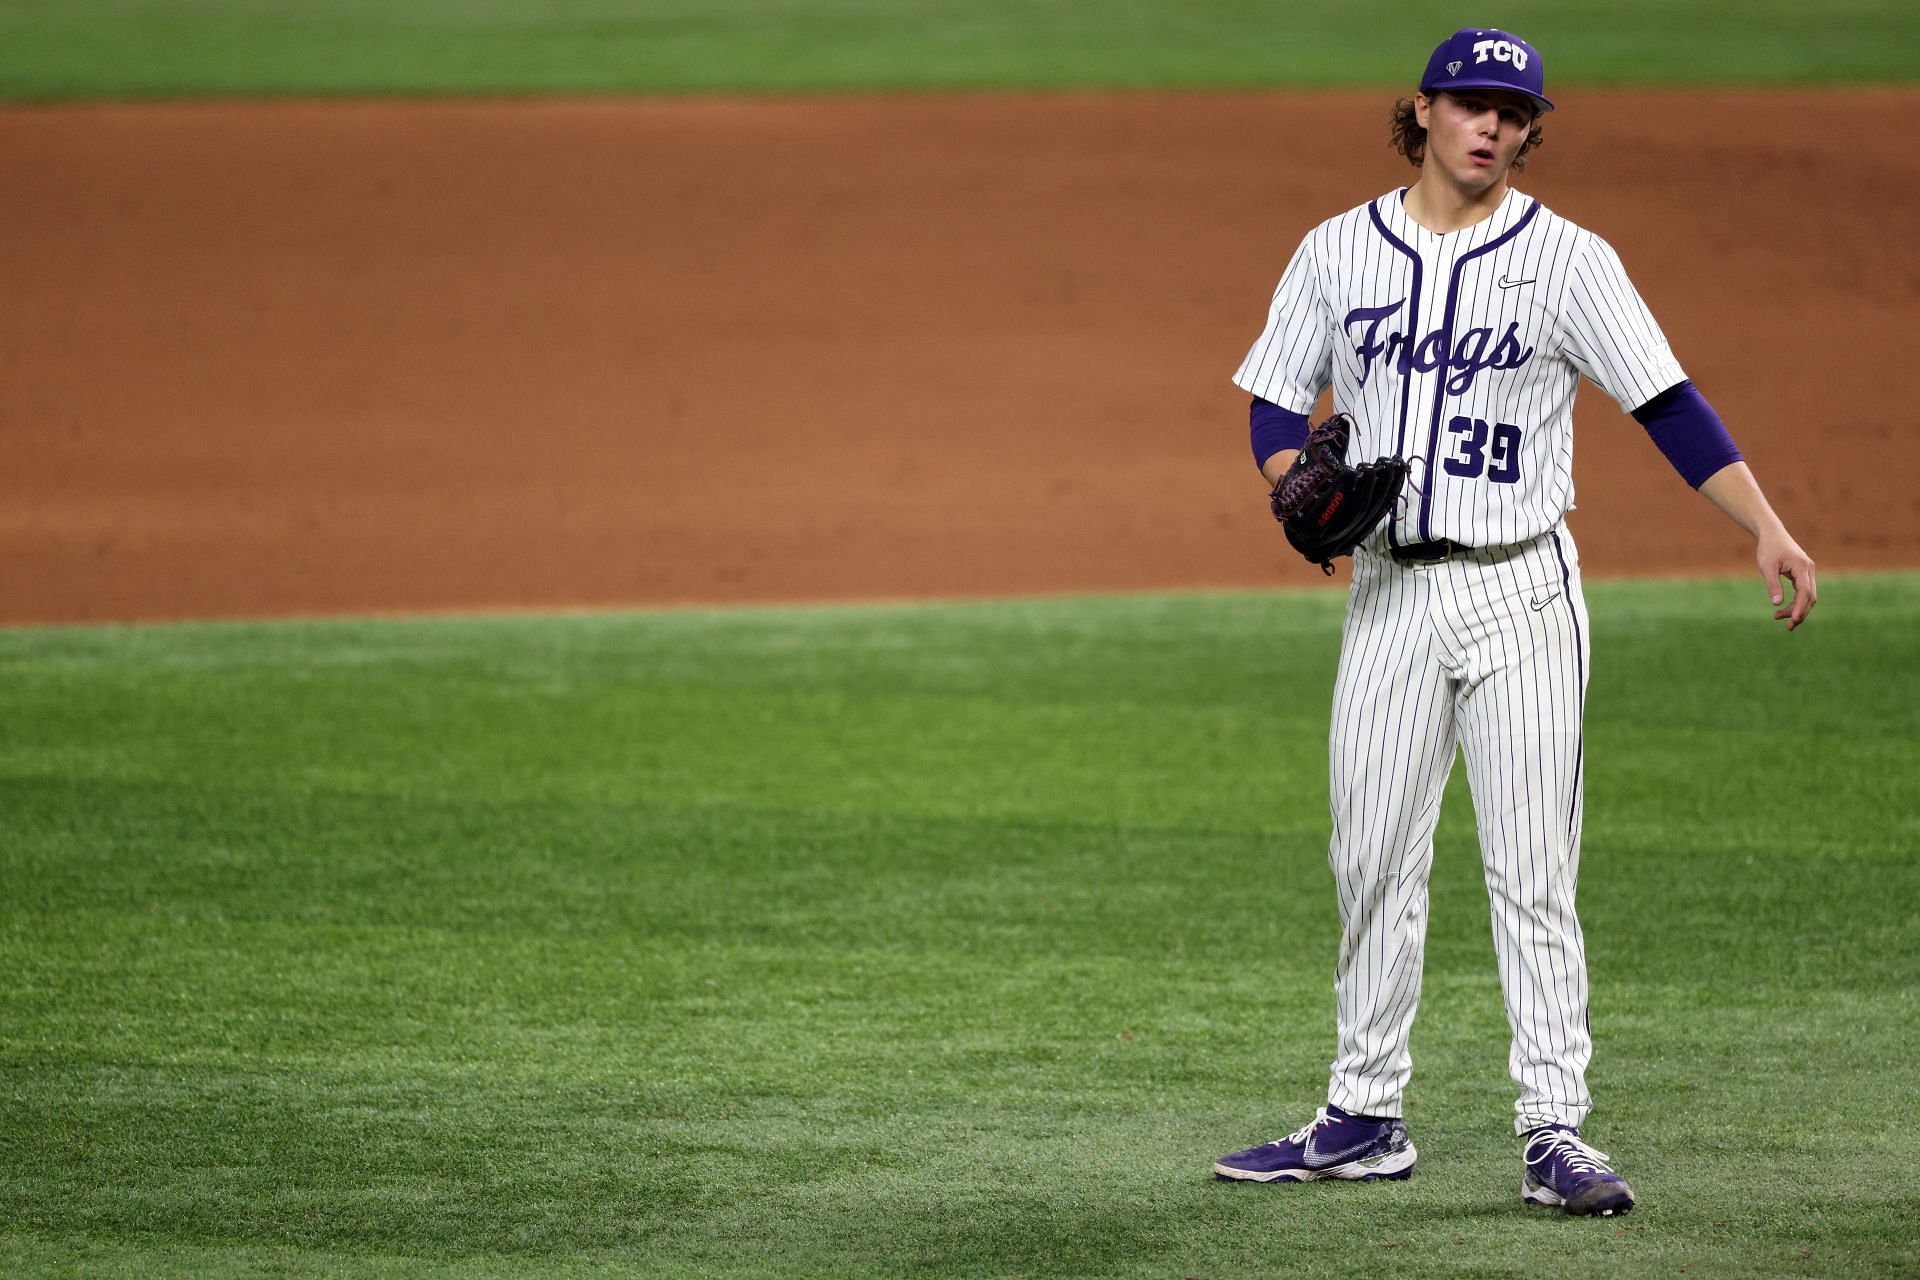 Is 2023 the year for the Horned Frogs?